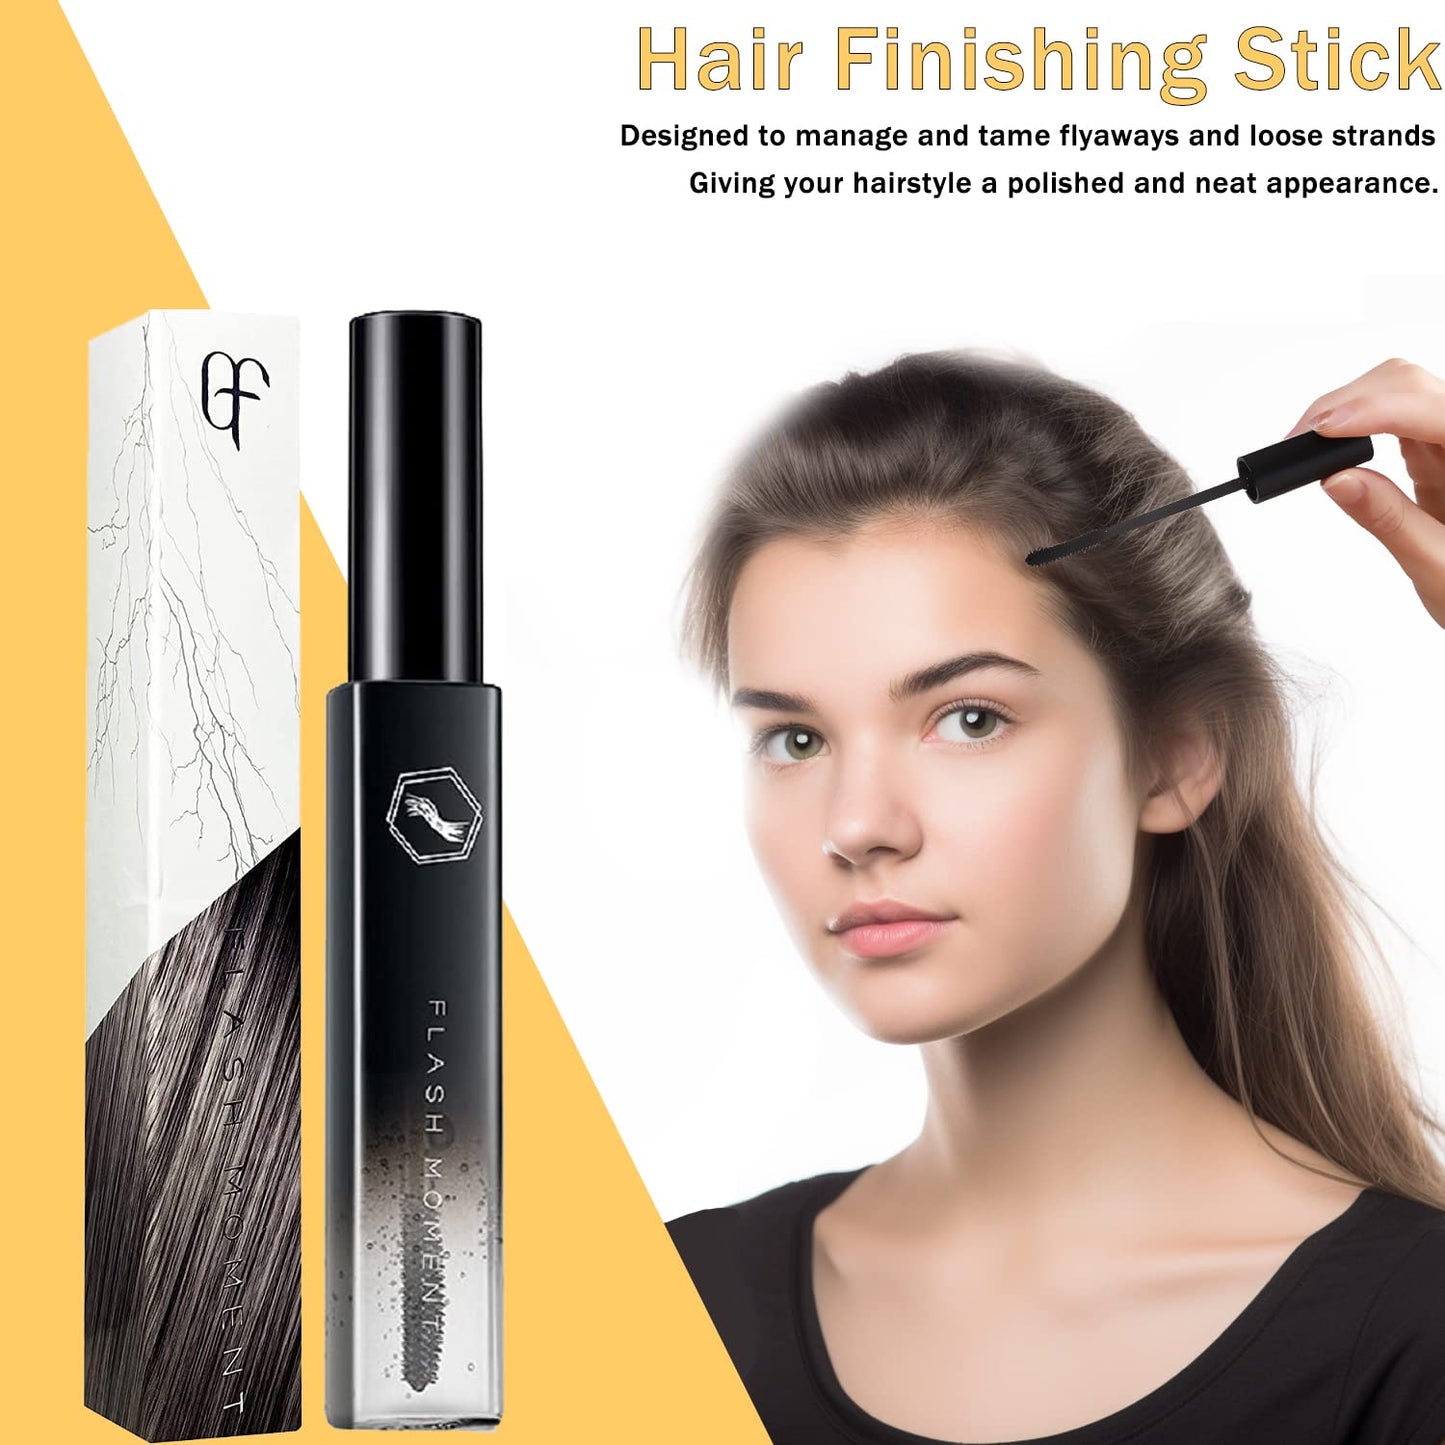 7 Pcs Hair Wax Stick for Flyaways Edge Control Slick Stick - Hair Styling Products Includes Wax Stick for Hair, Hair Finishing Stick, Hair Styling Comb, Elastic Bands for Wig Edges for Women